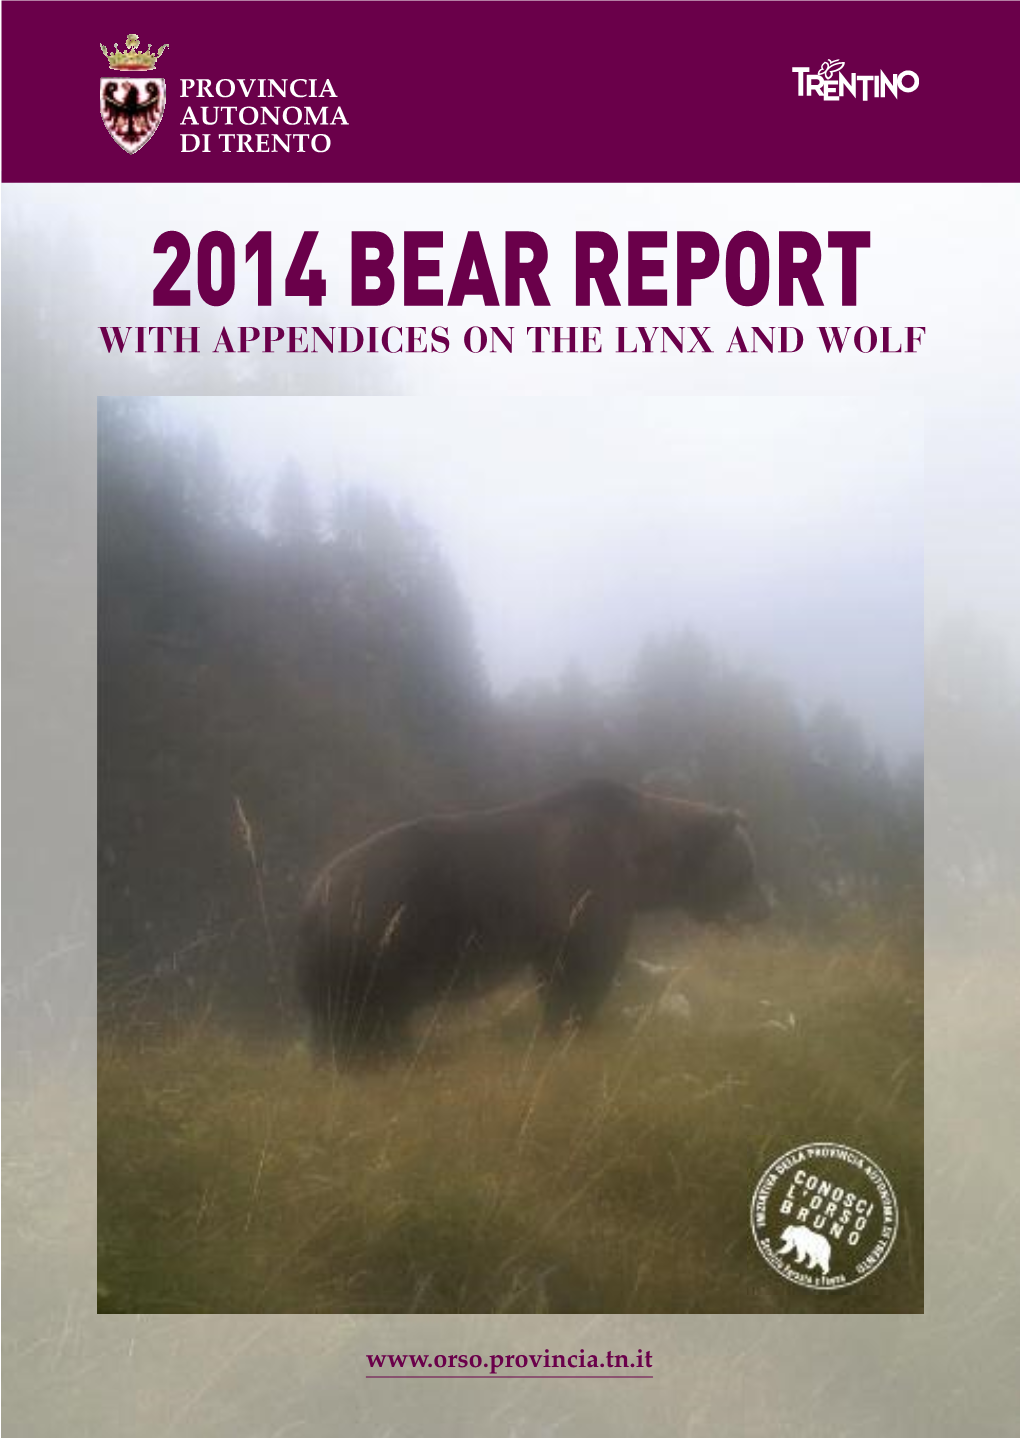 2014 Bear Report with Appendices on the Lynx and Wolf 2014 Bear Report